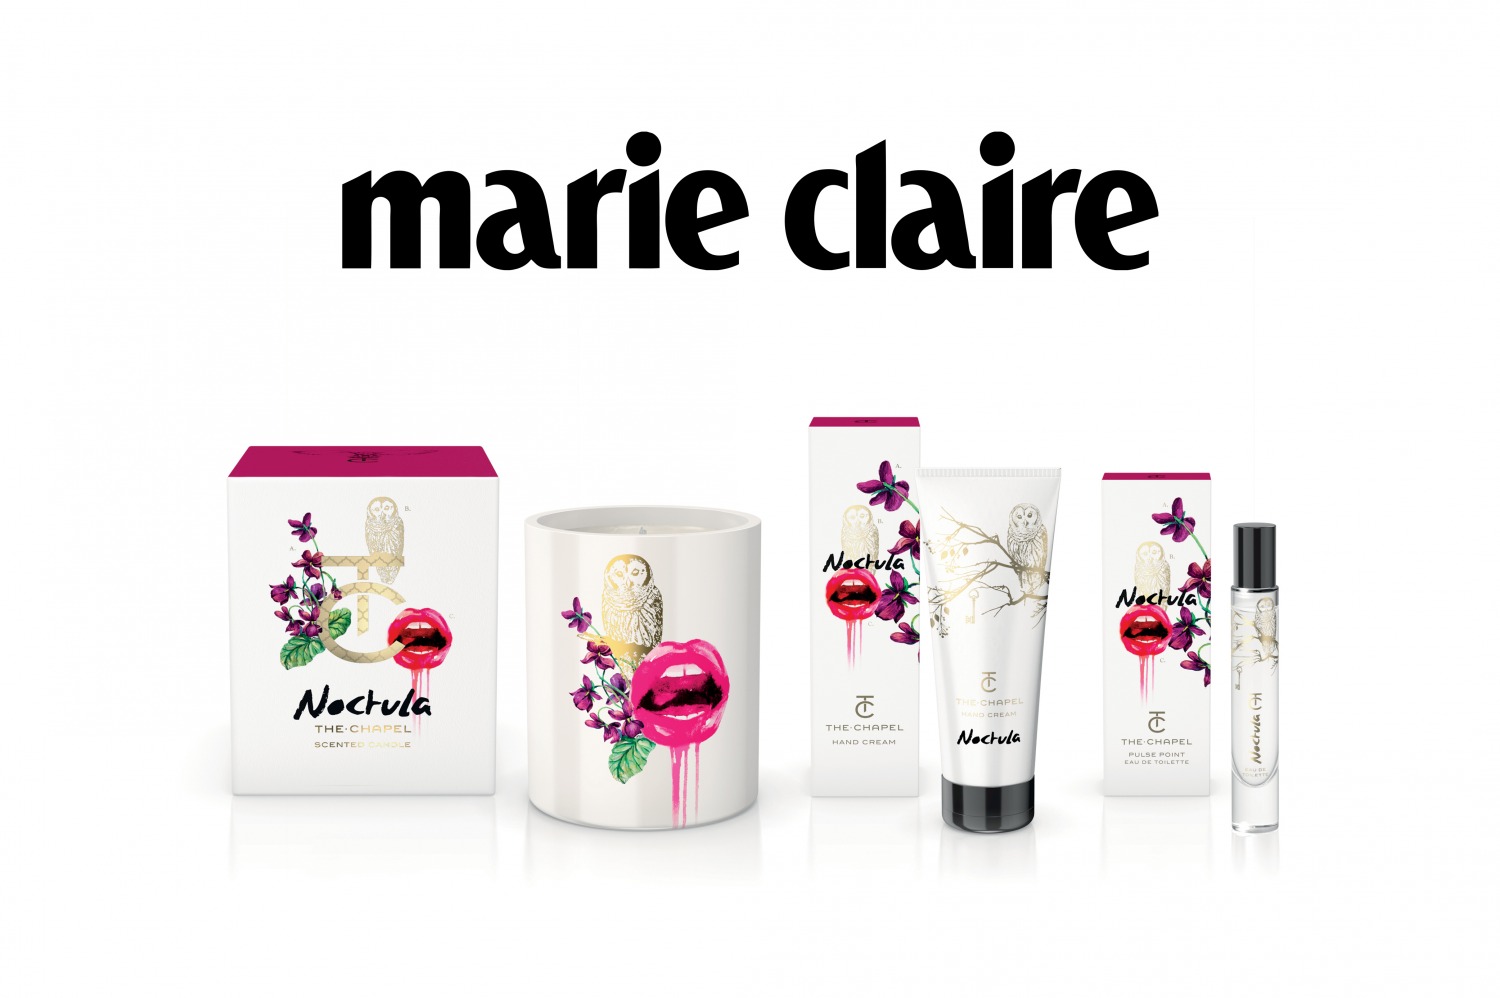 Marie Claire Feature The Chapel Fragrance Collection, again!